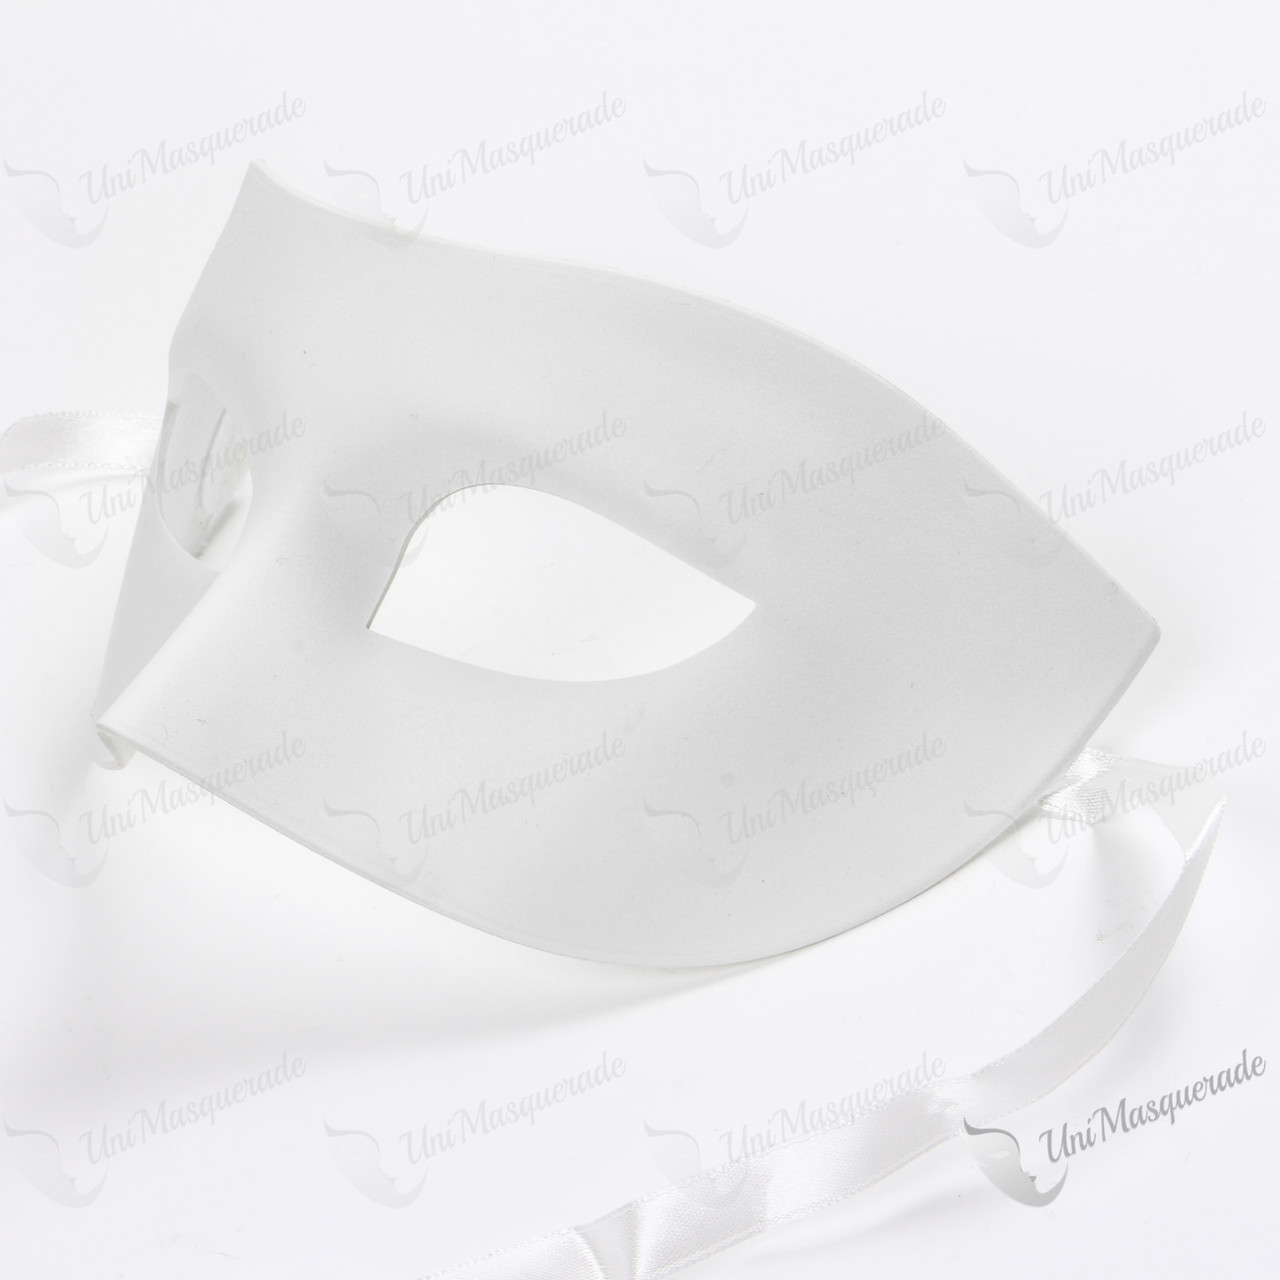 Volto venetian face mask (blank white) Type A